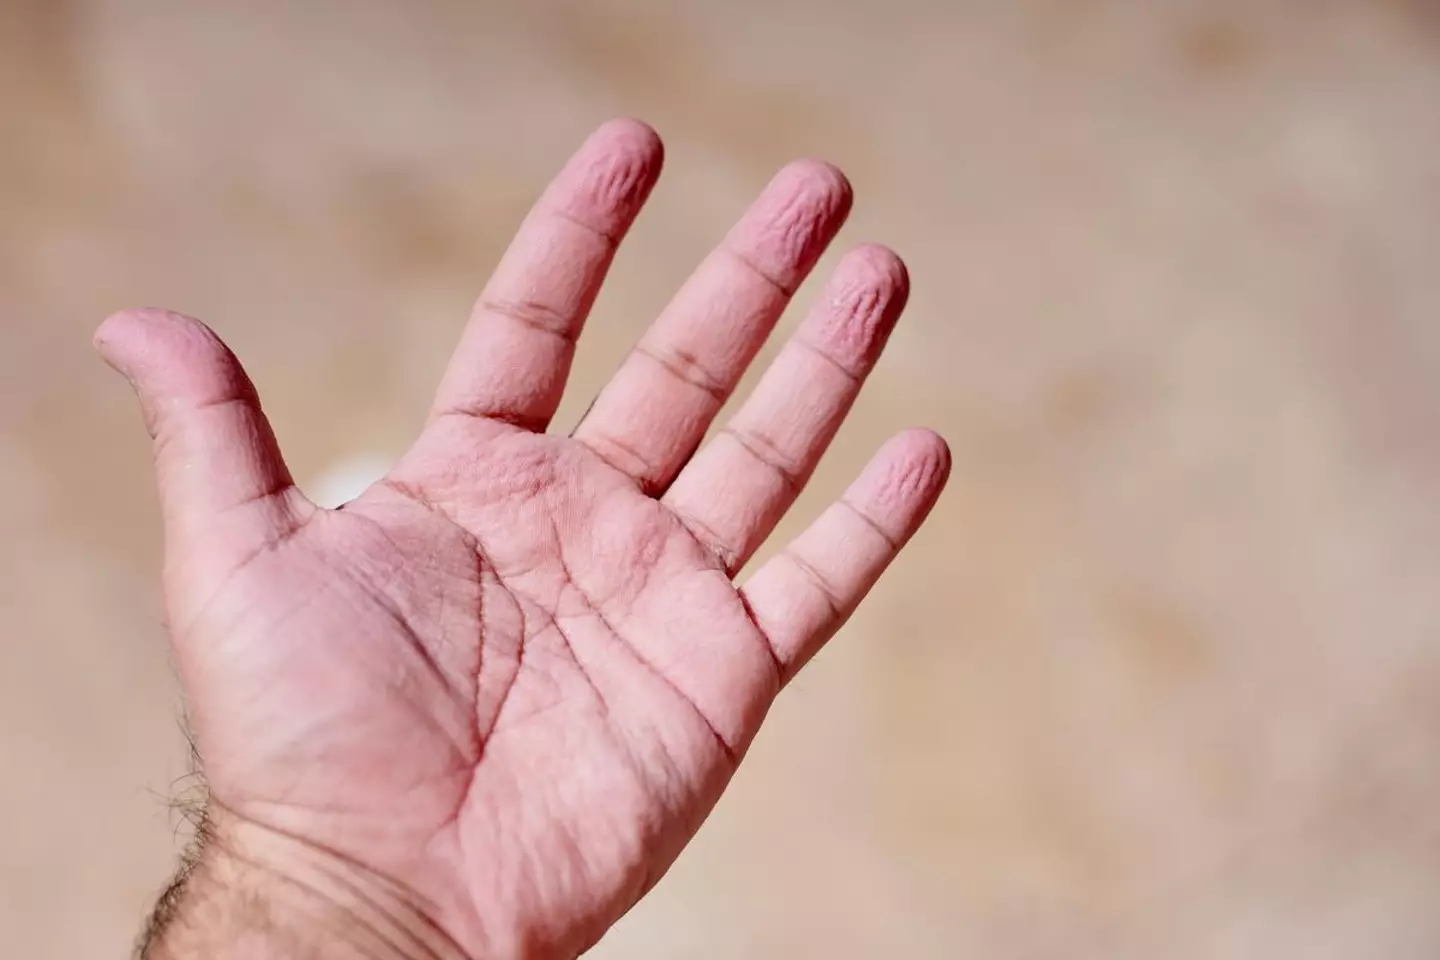 There's an evolutionary reason why humans get wrinkly fingers in water.